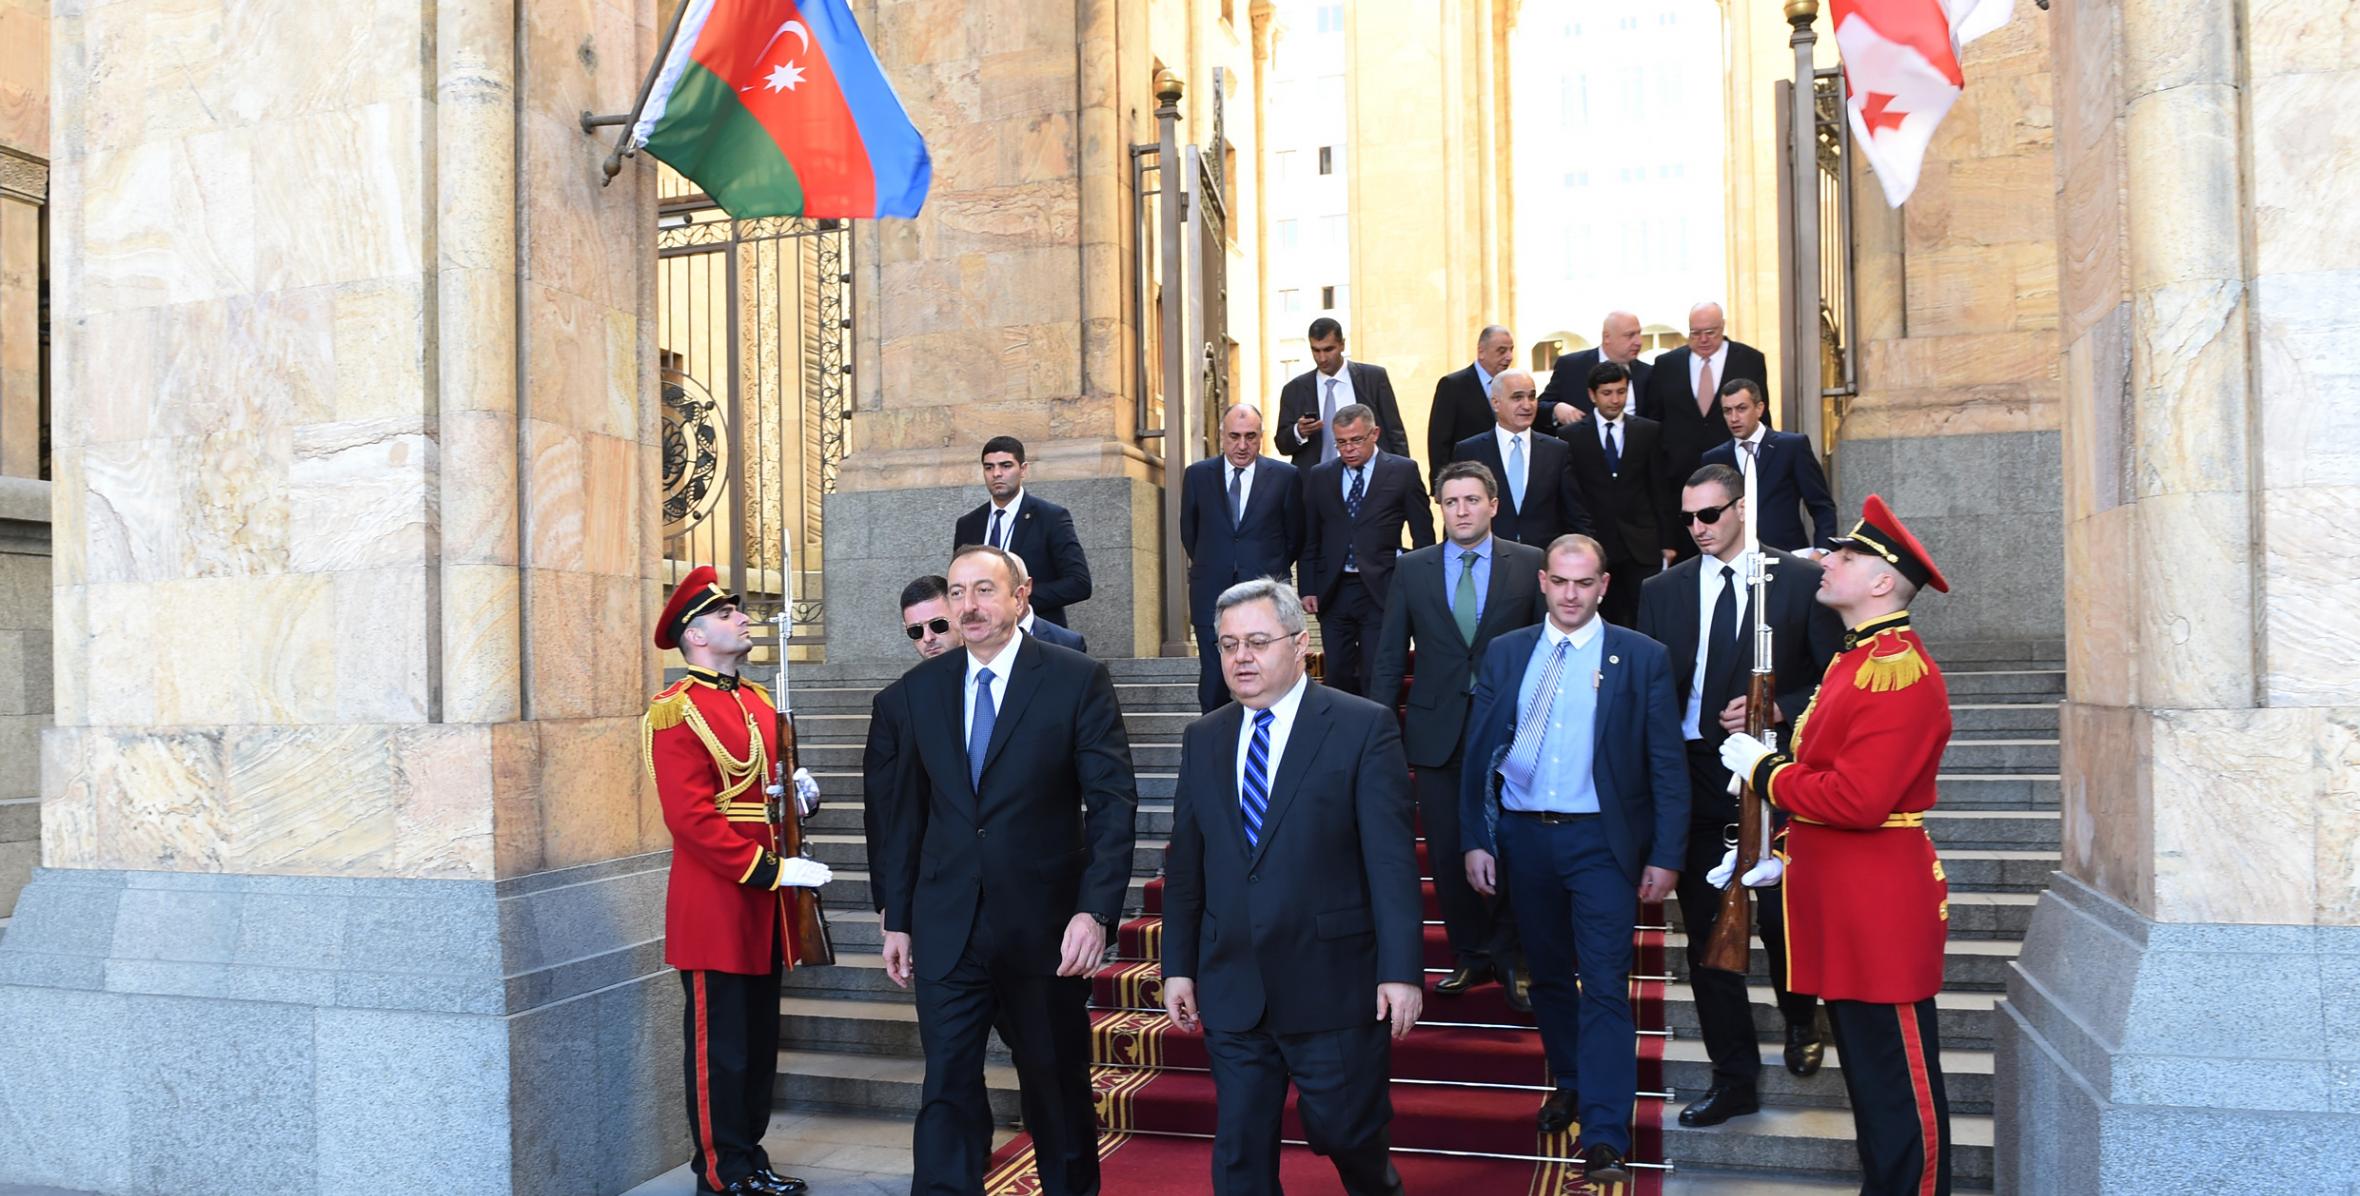 Ilham Aliyev met with the Chairman of the Georgian Parliament